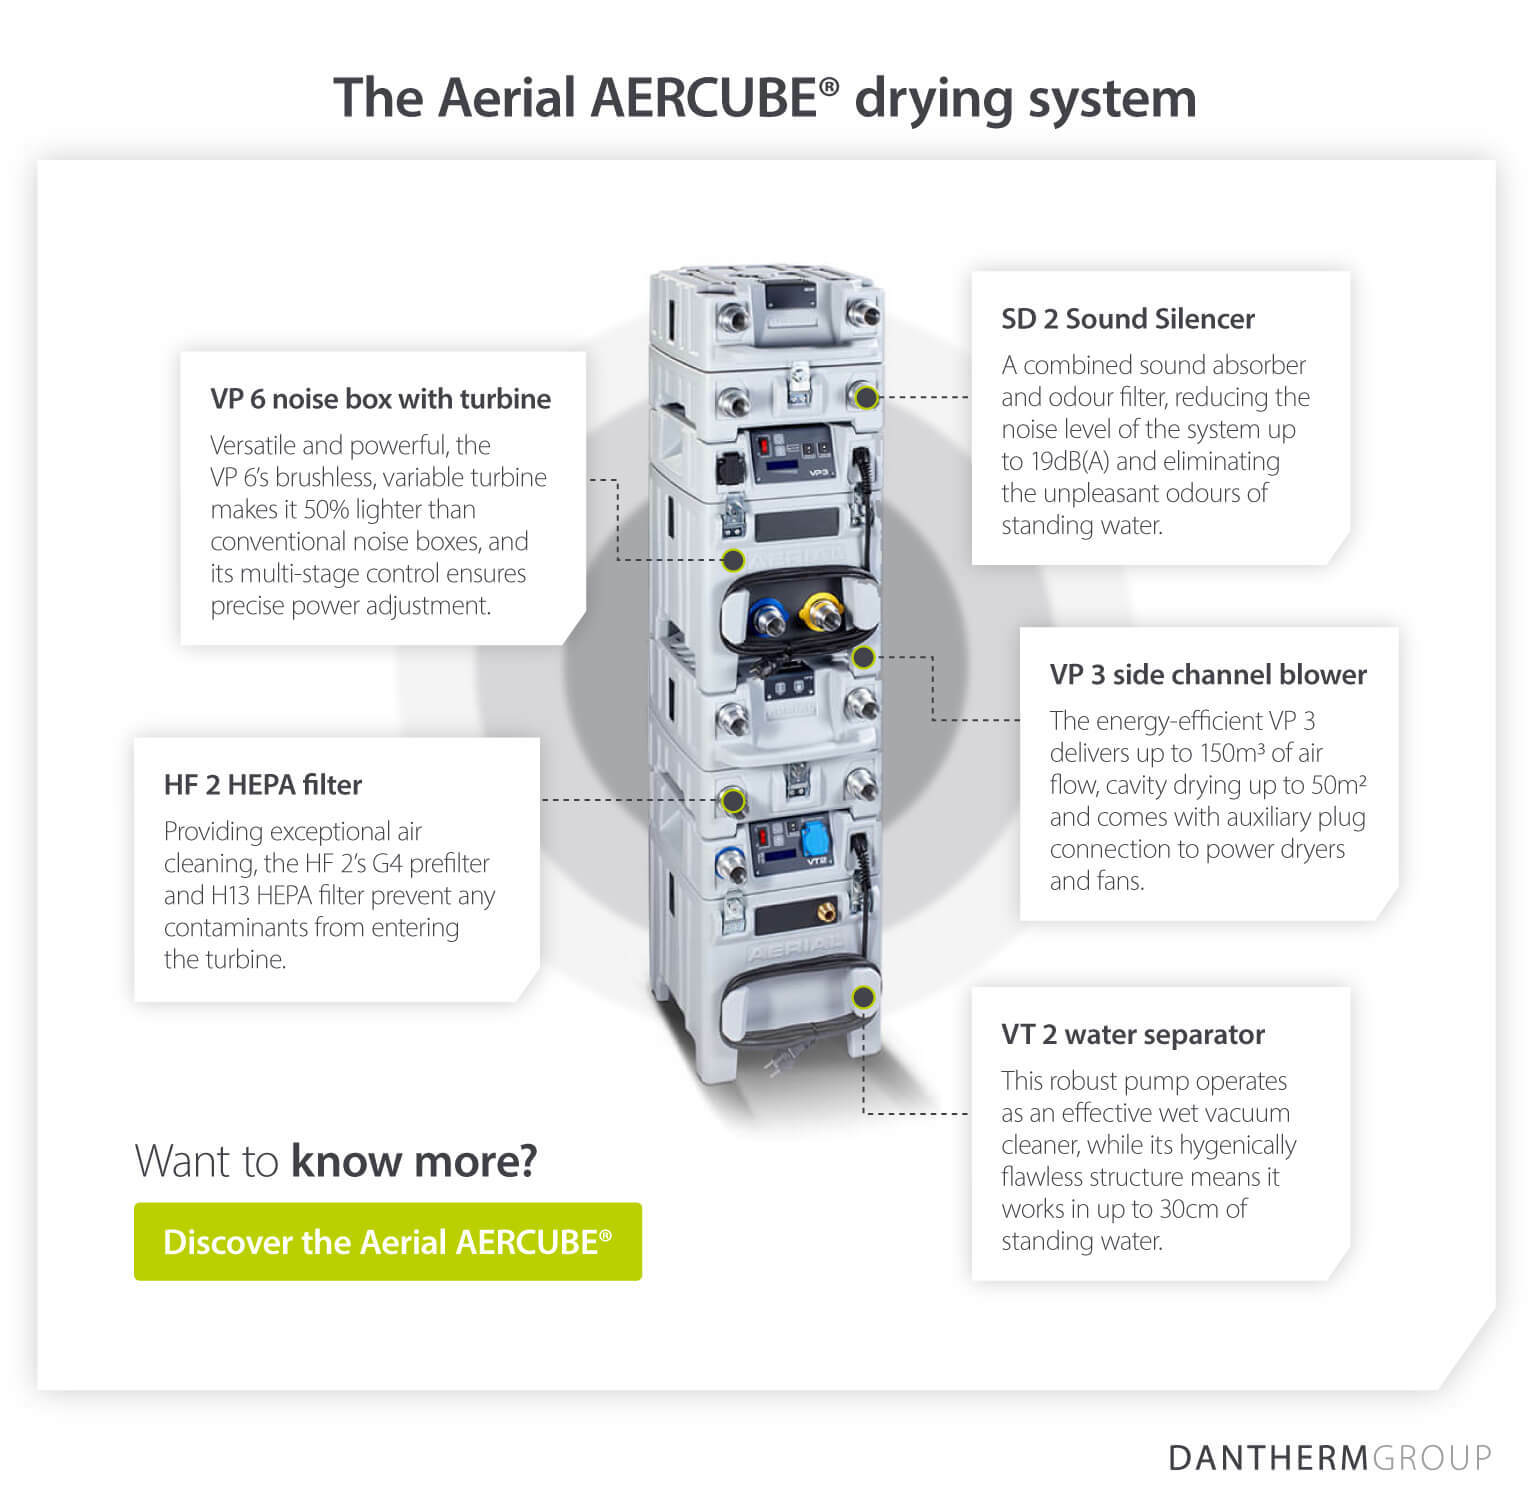 Aerial AERCUBE® professional water damage drying system and features - Infographic image